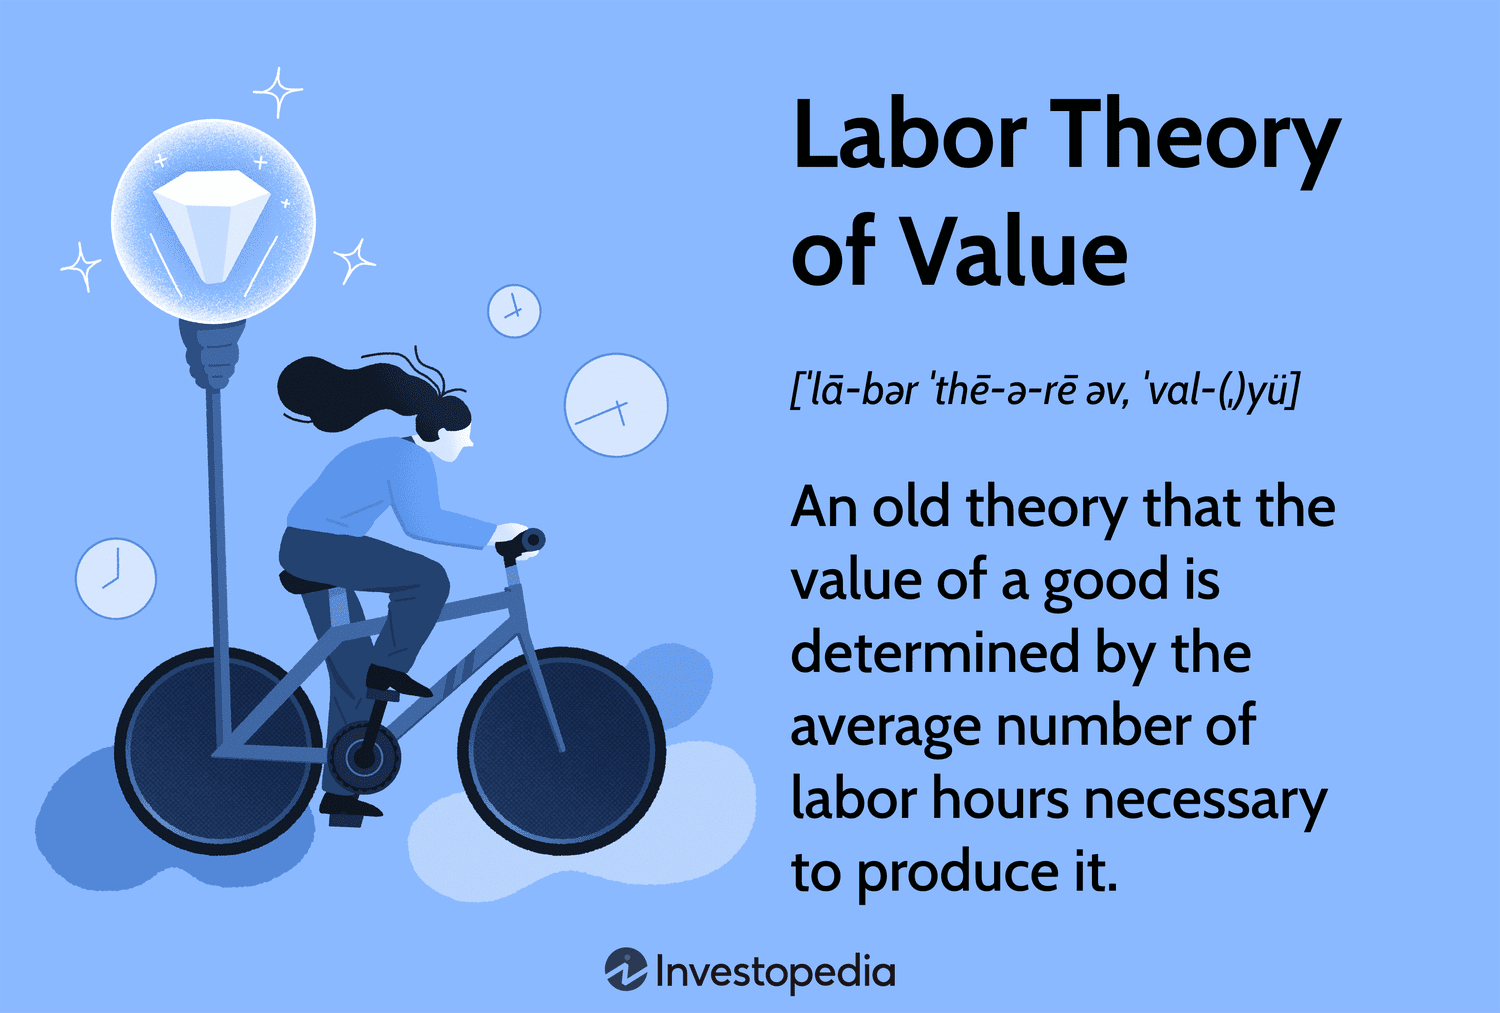 Labor Theory of Value: An old theory that the value of a good is determined by the average number of labor hours necessary to produce it.